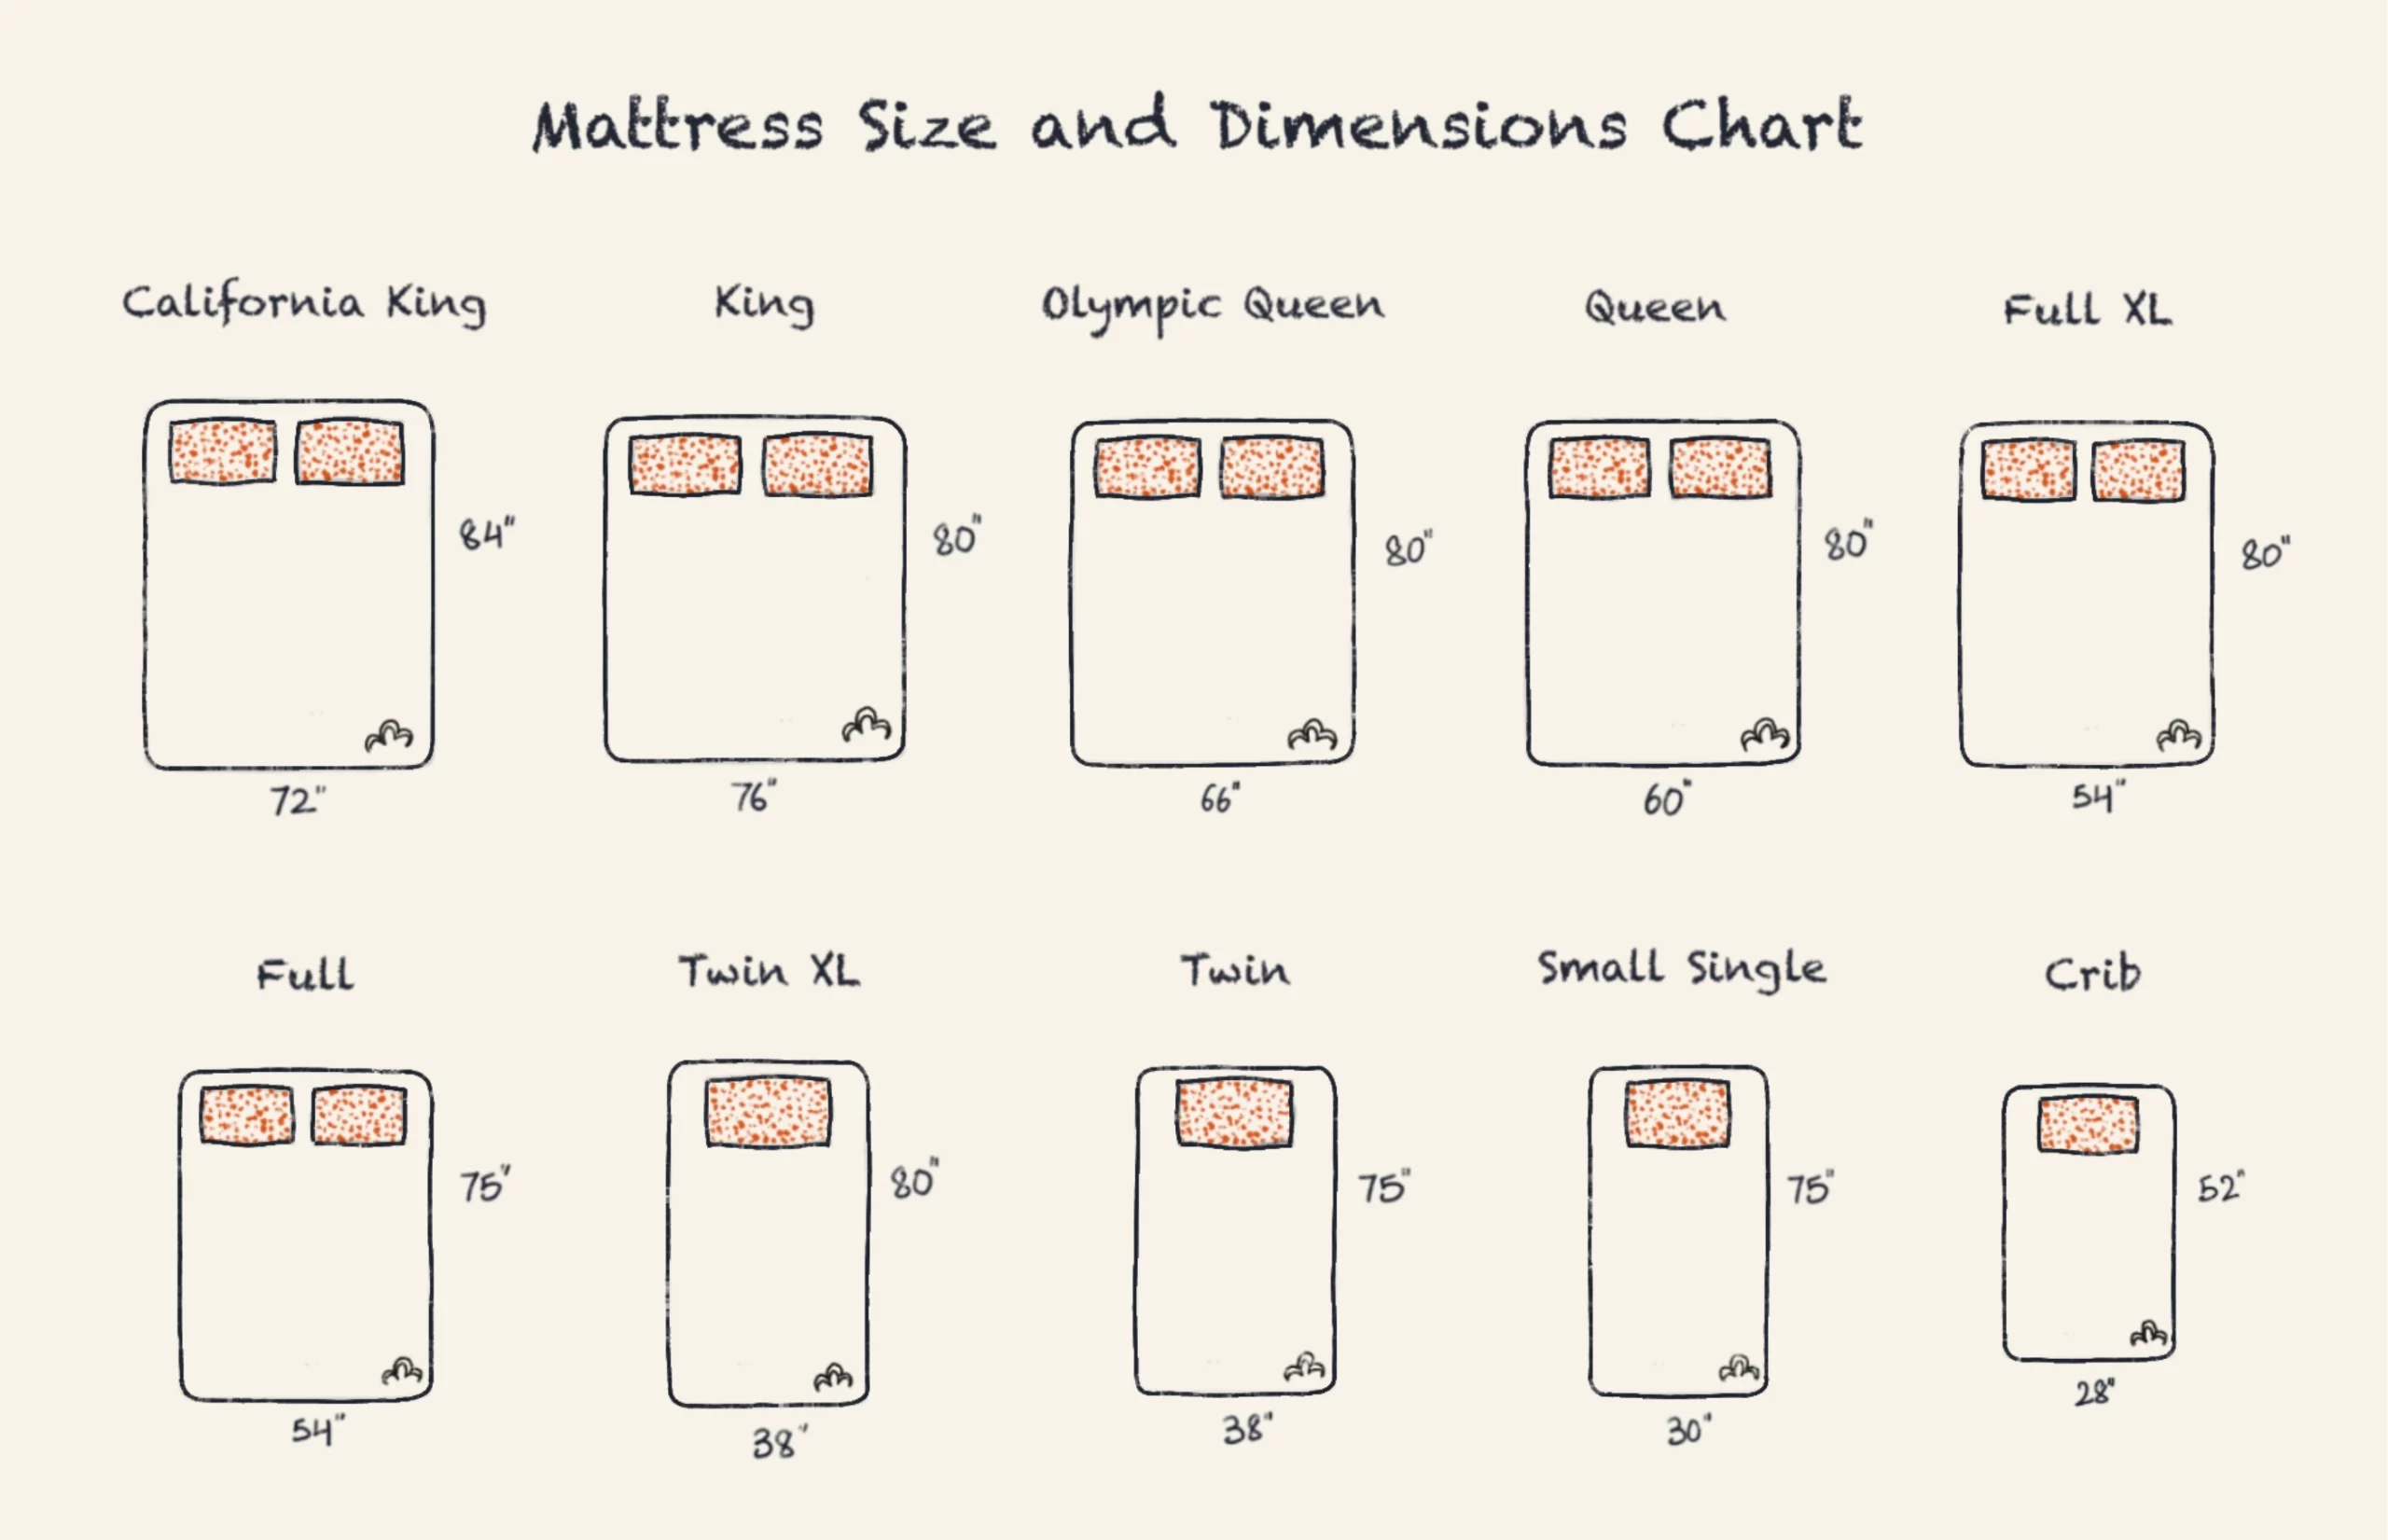 Mattress dimension and bed size chart illustration